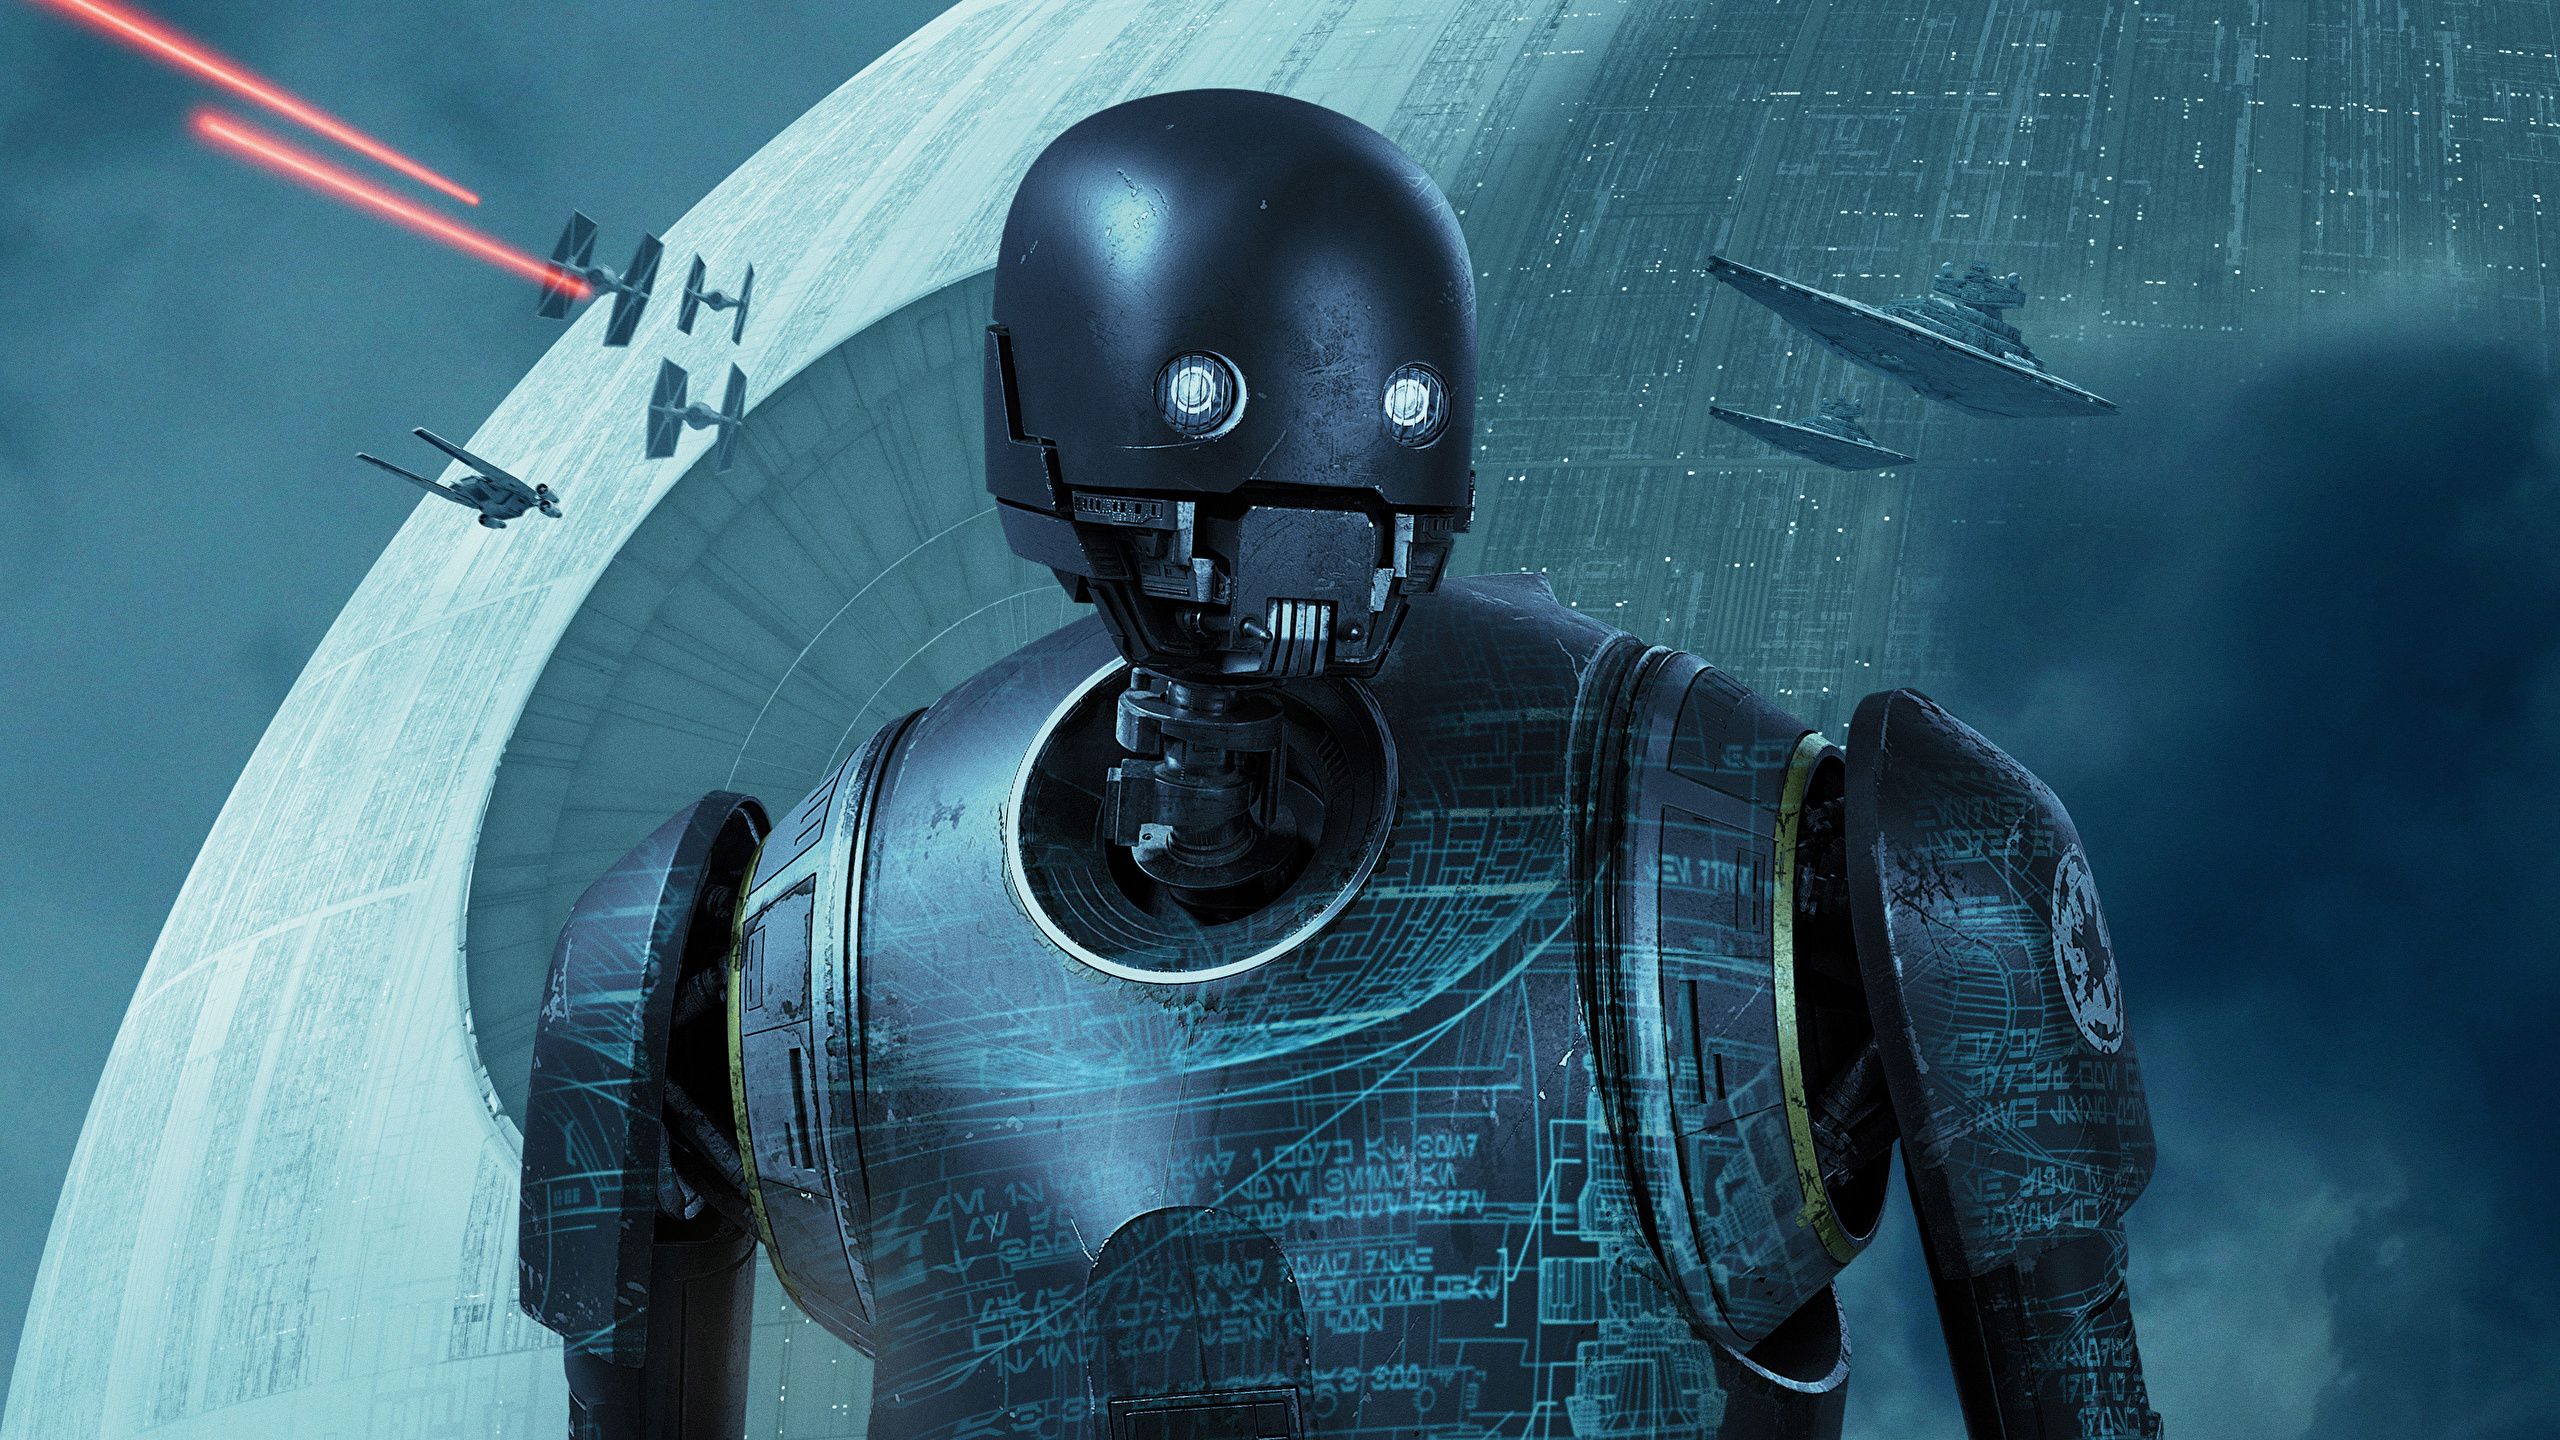 Wallpaper Rogue One: A Star Wars Story Robot K 2SO Movies 2560x1440